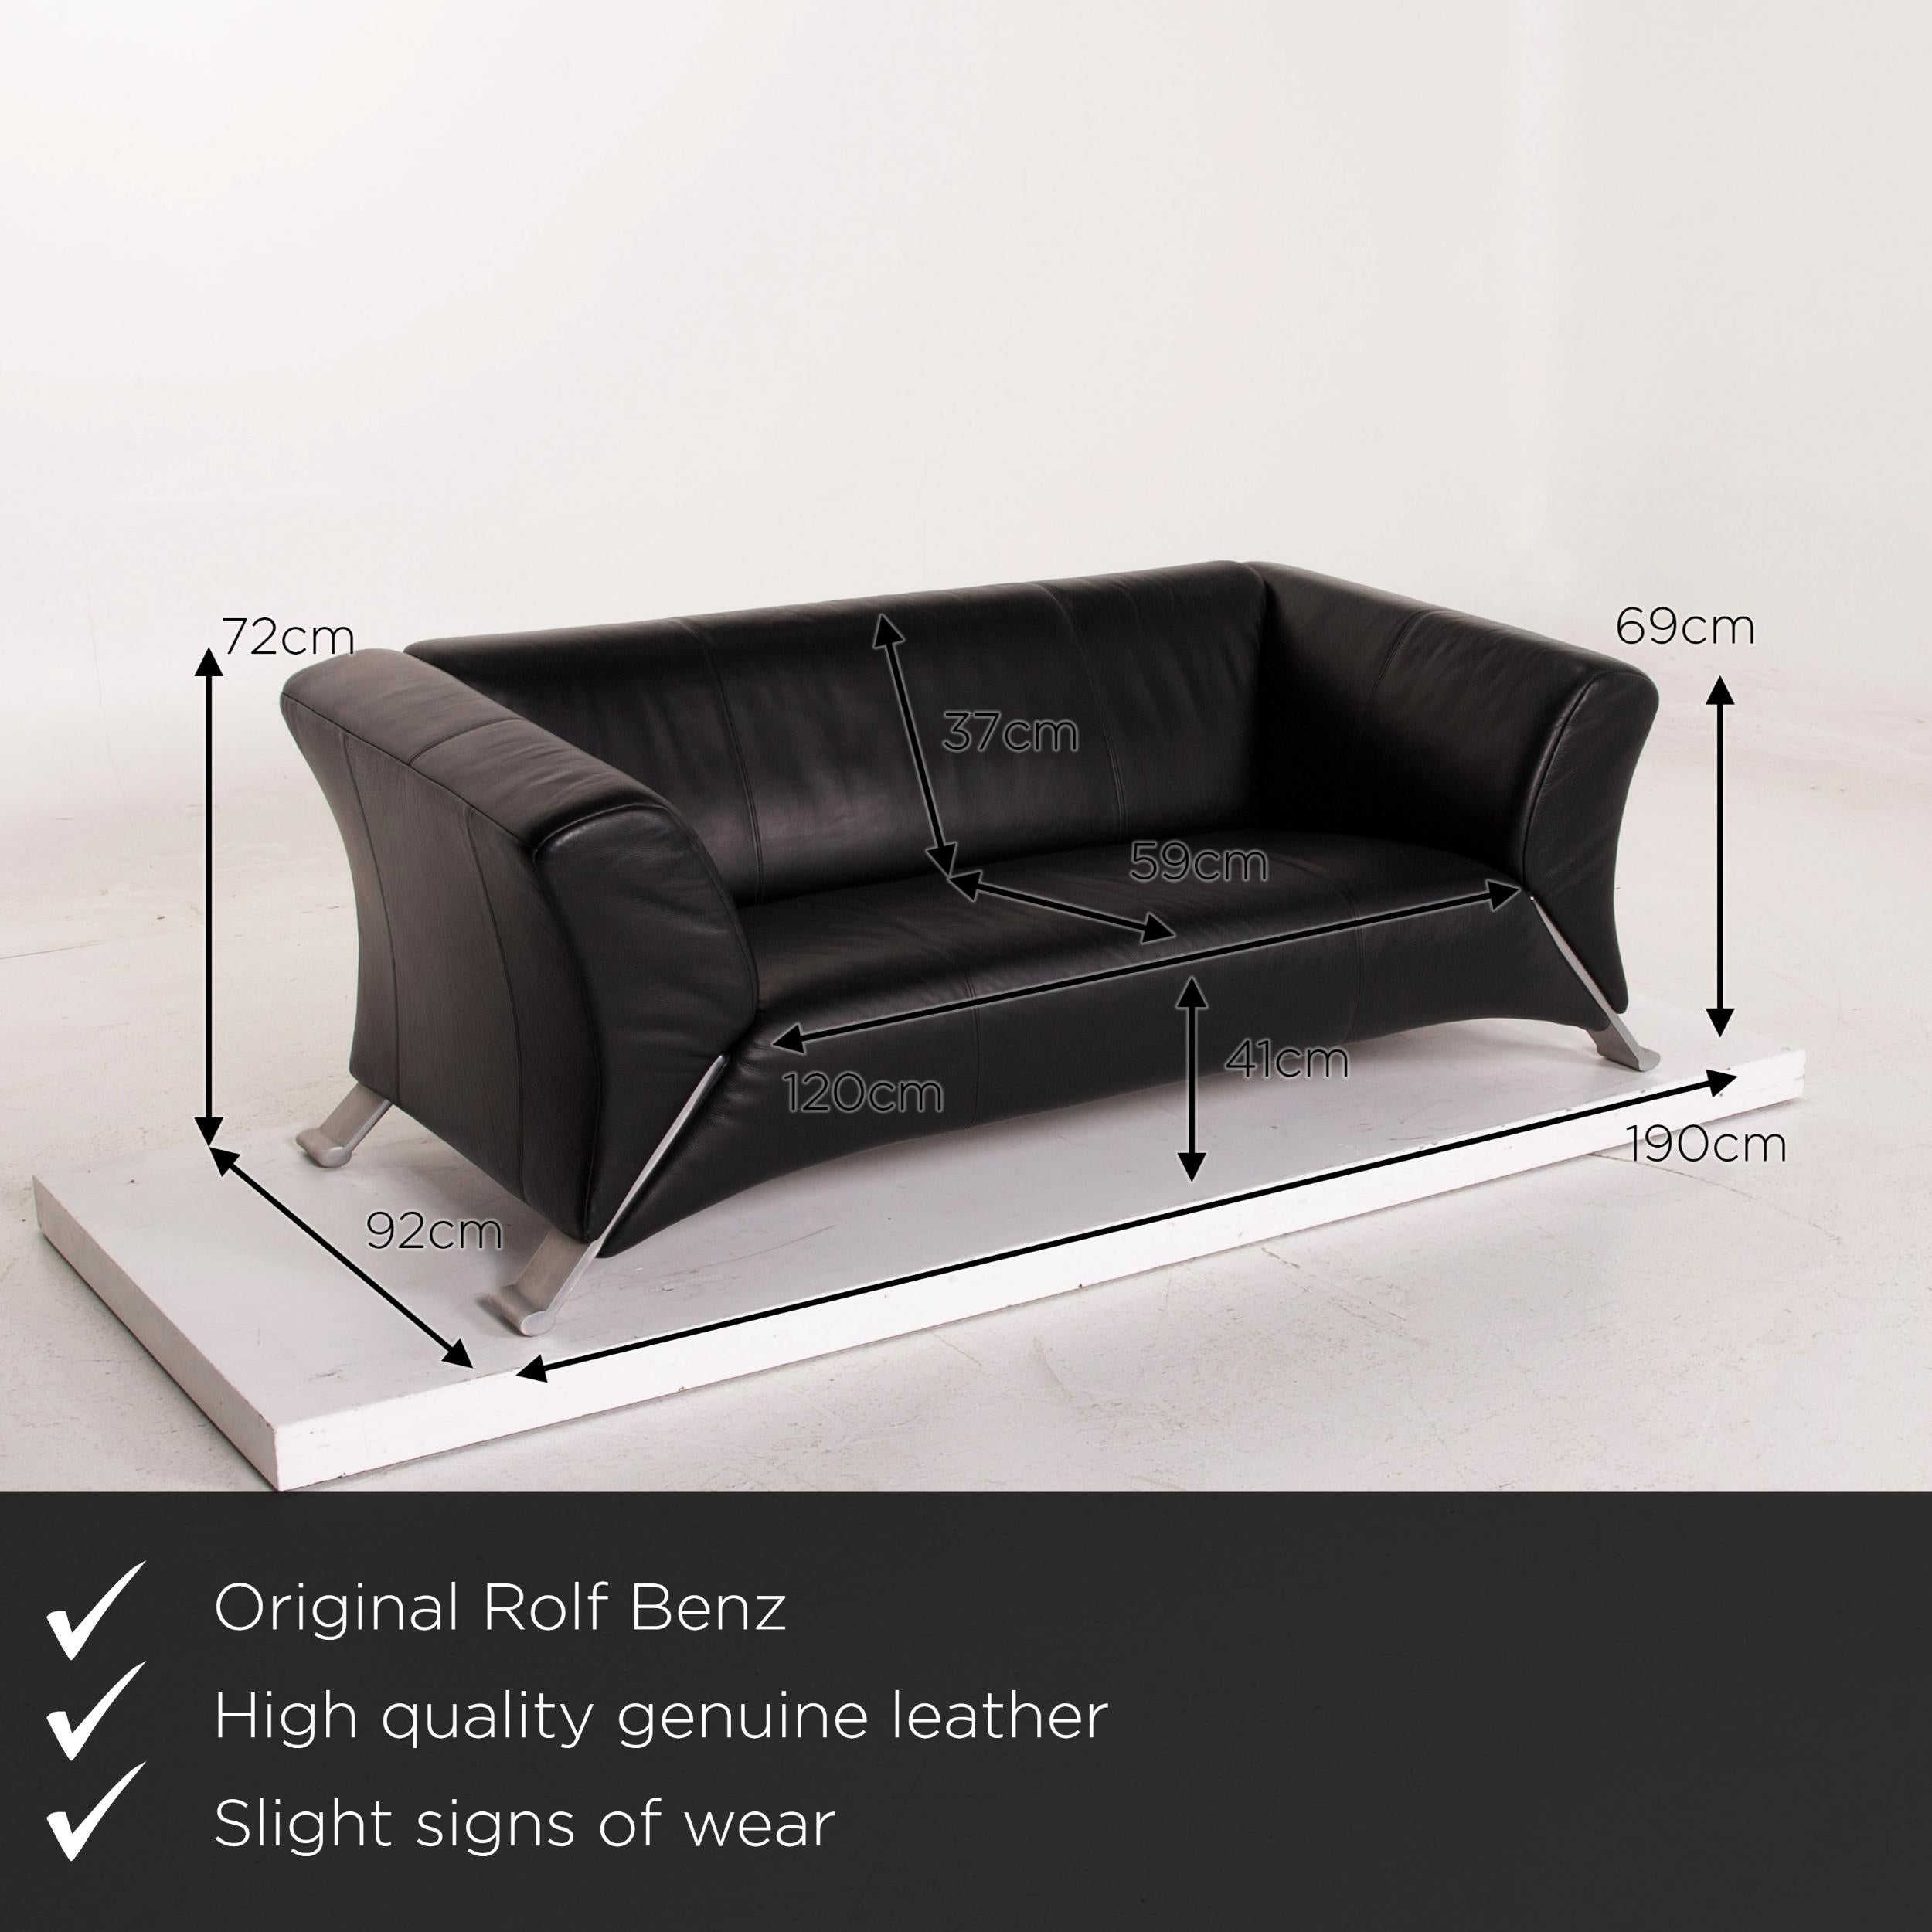 We present to you a Rolf Benz 322 leather sofa black two-seater couch.
 
 

 Product measurements in centimeters:
 

 depth: 92
 width: 190
 height: 72
 seat height: 41
 rest height: 69
 seat depth: 59
 seat width: 120
 back height: 37.